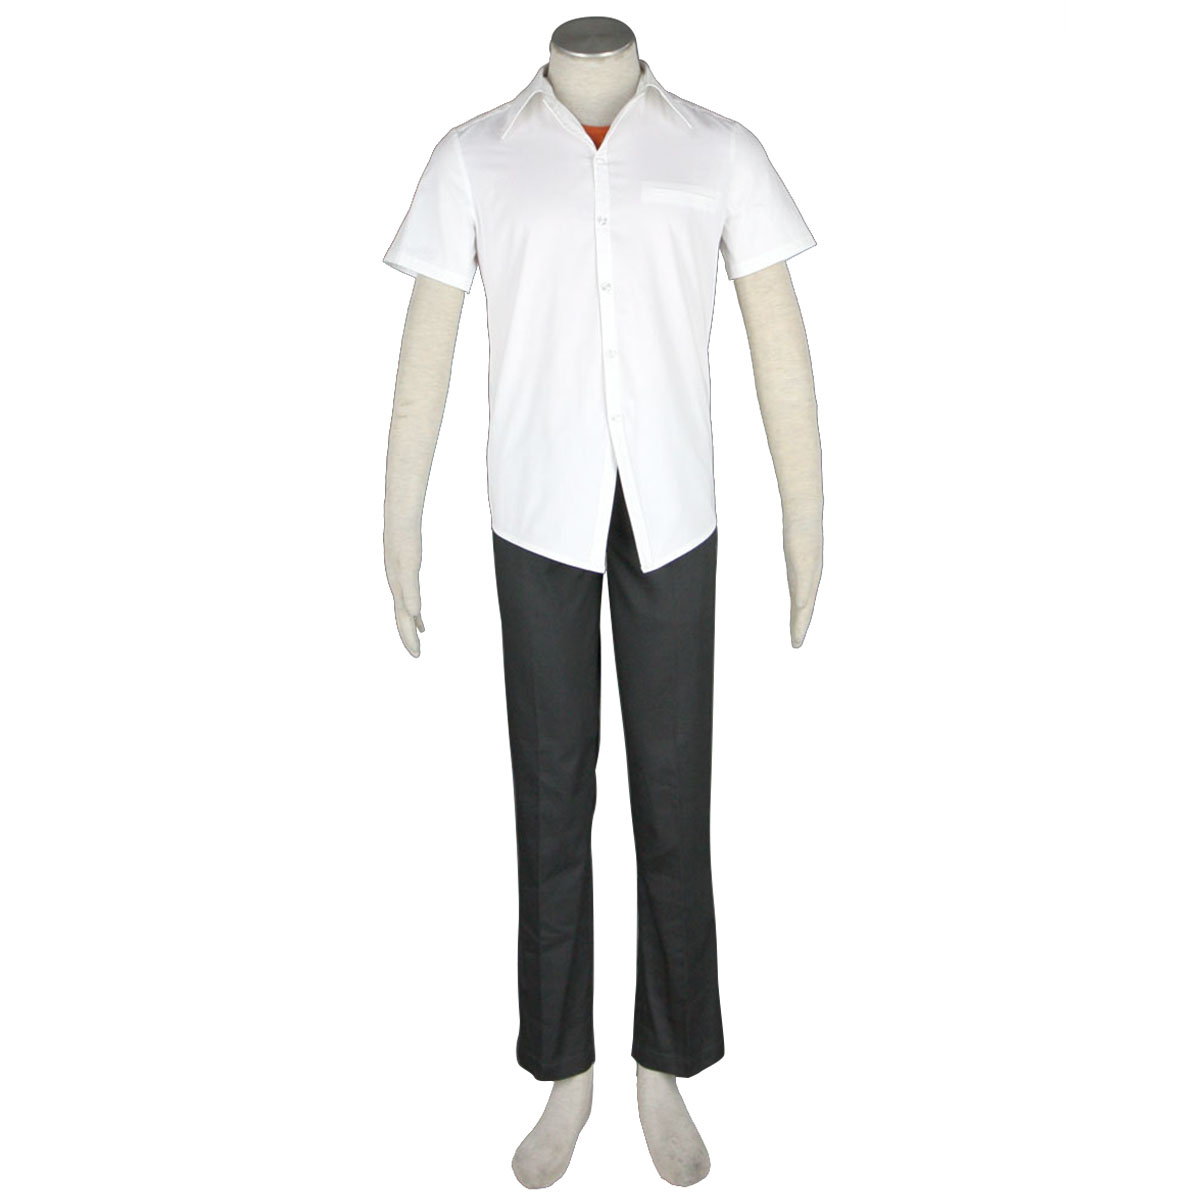 A Certain Magical Index Kamijou Touma 1 Cosplay Costumes New Zealand Online Store